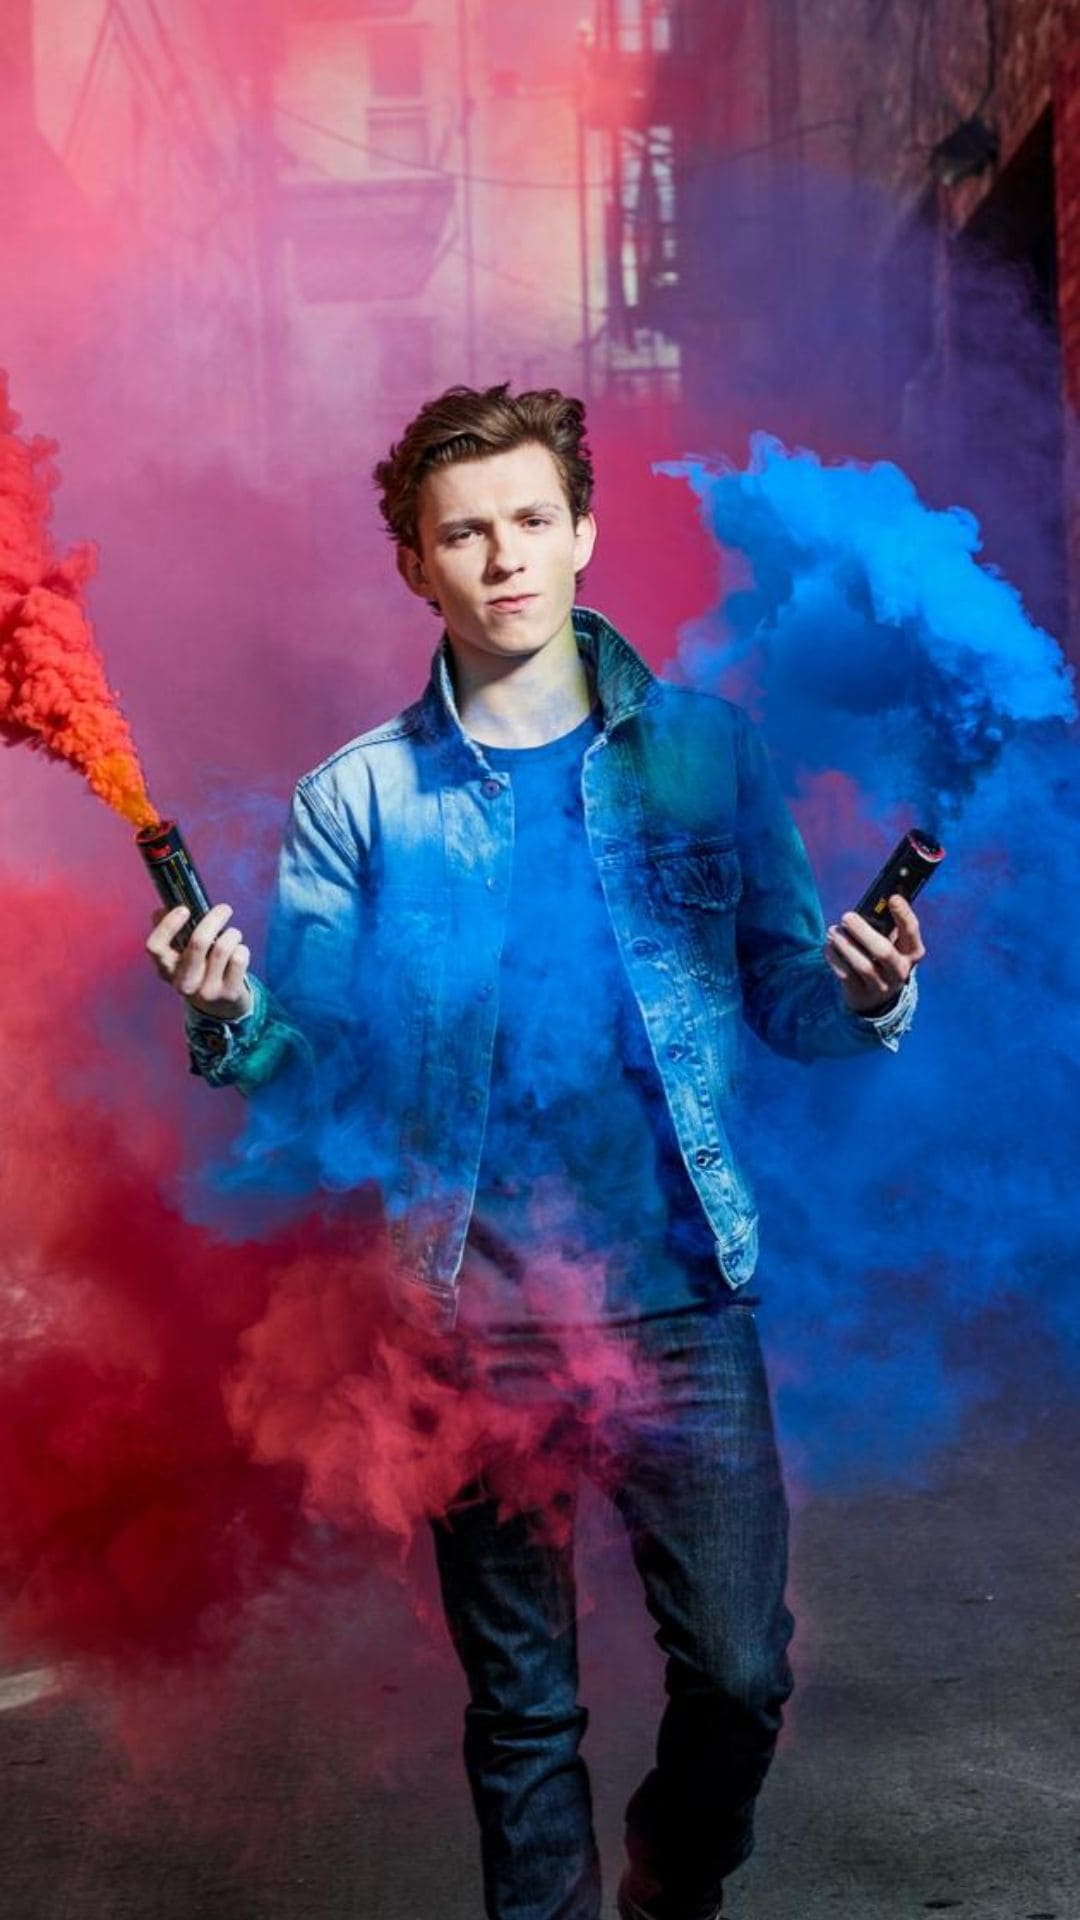 Tom Holland holding smoke bombs in his hands - Tom Holland